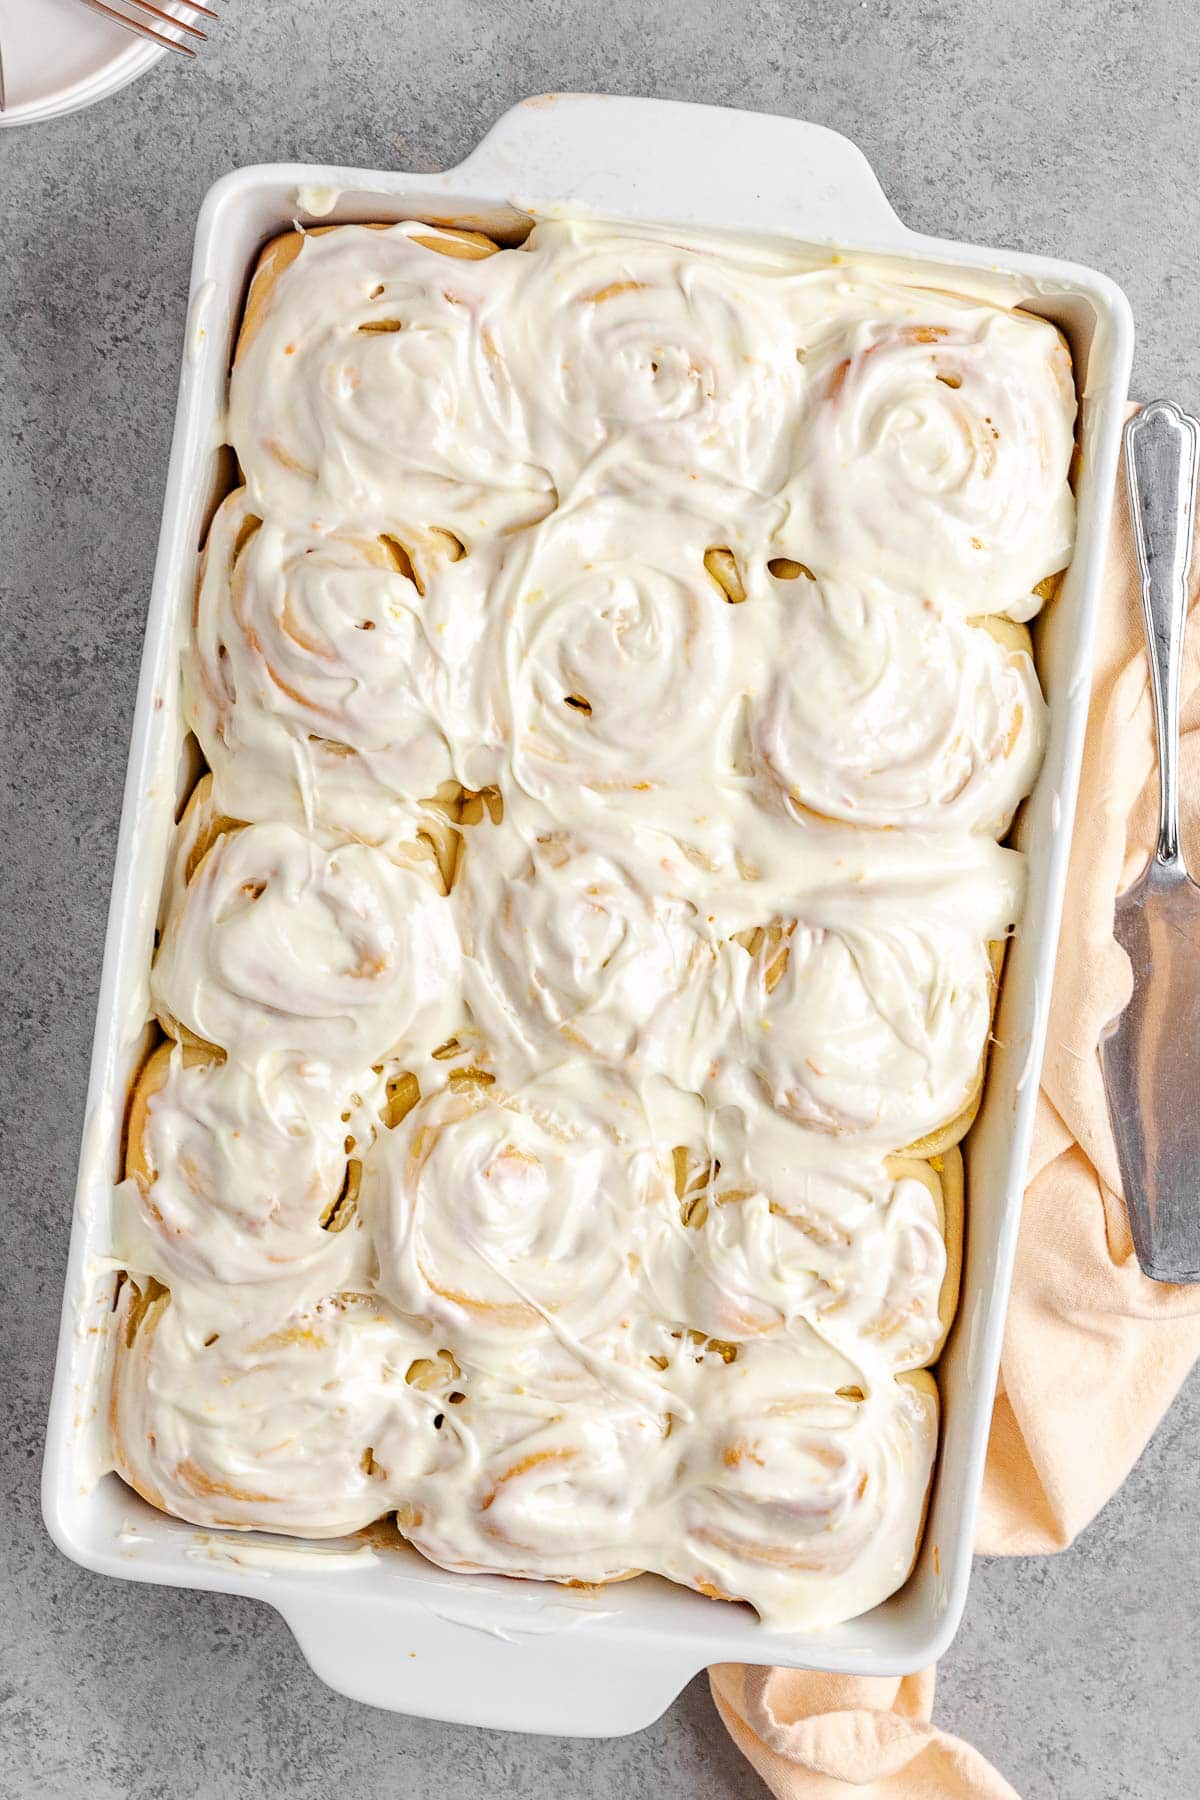 Orange Rolls with frosting in baking pan